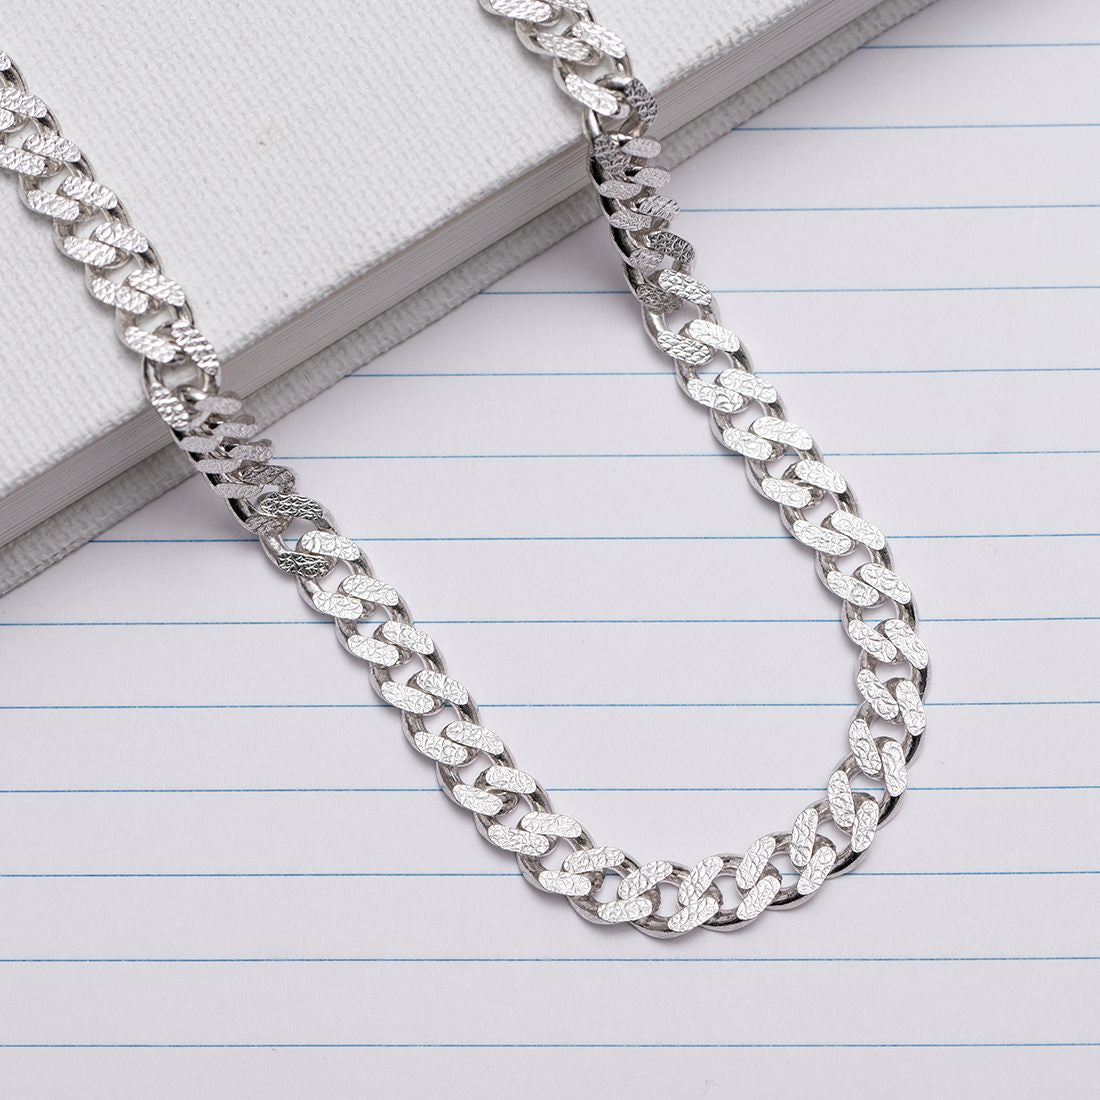 Masculine Links Rhodium Plated 925 Sterling Silver Men's Chain